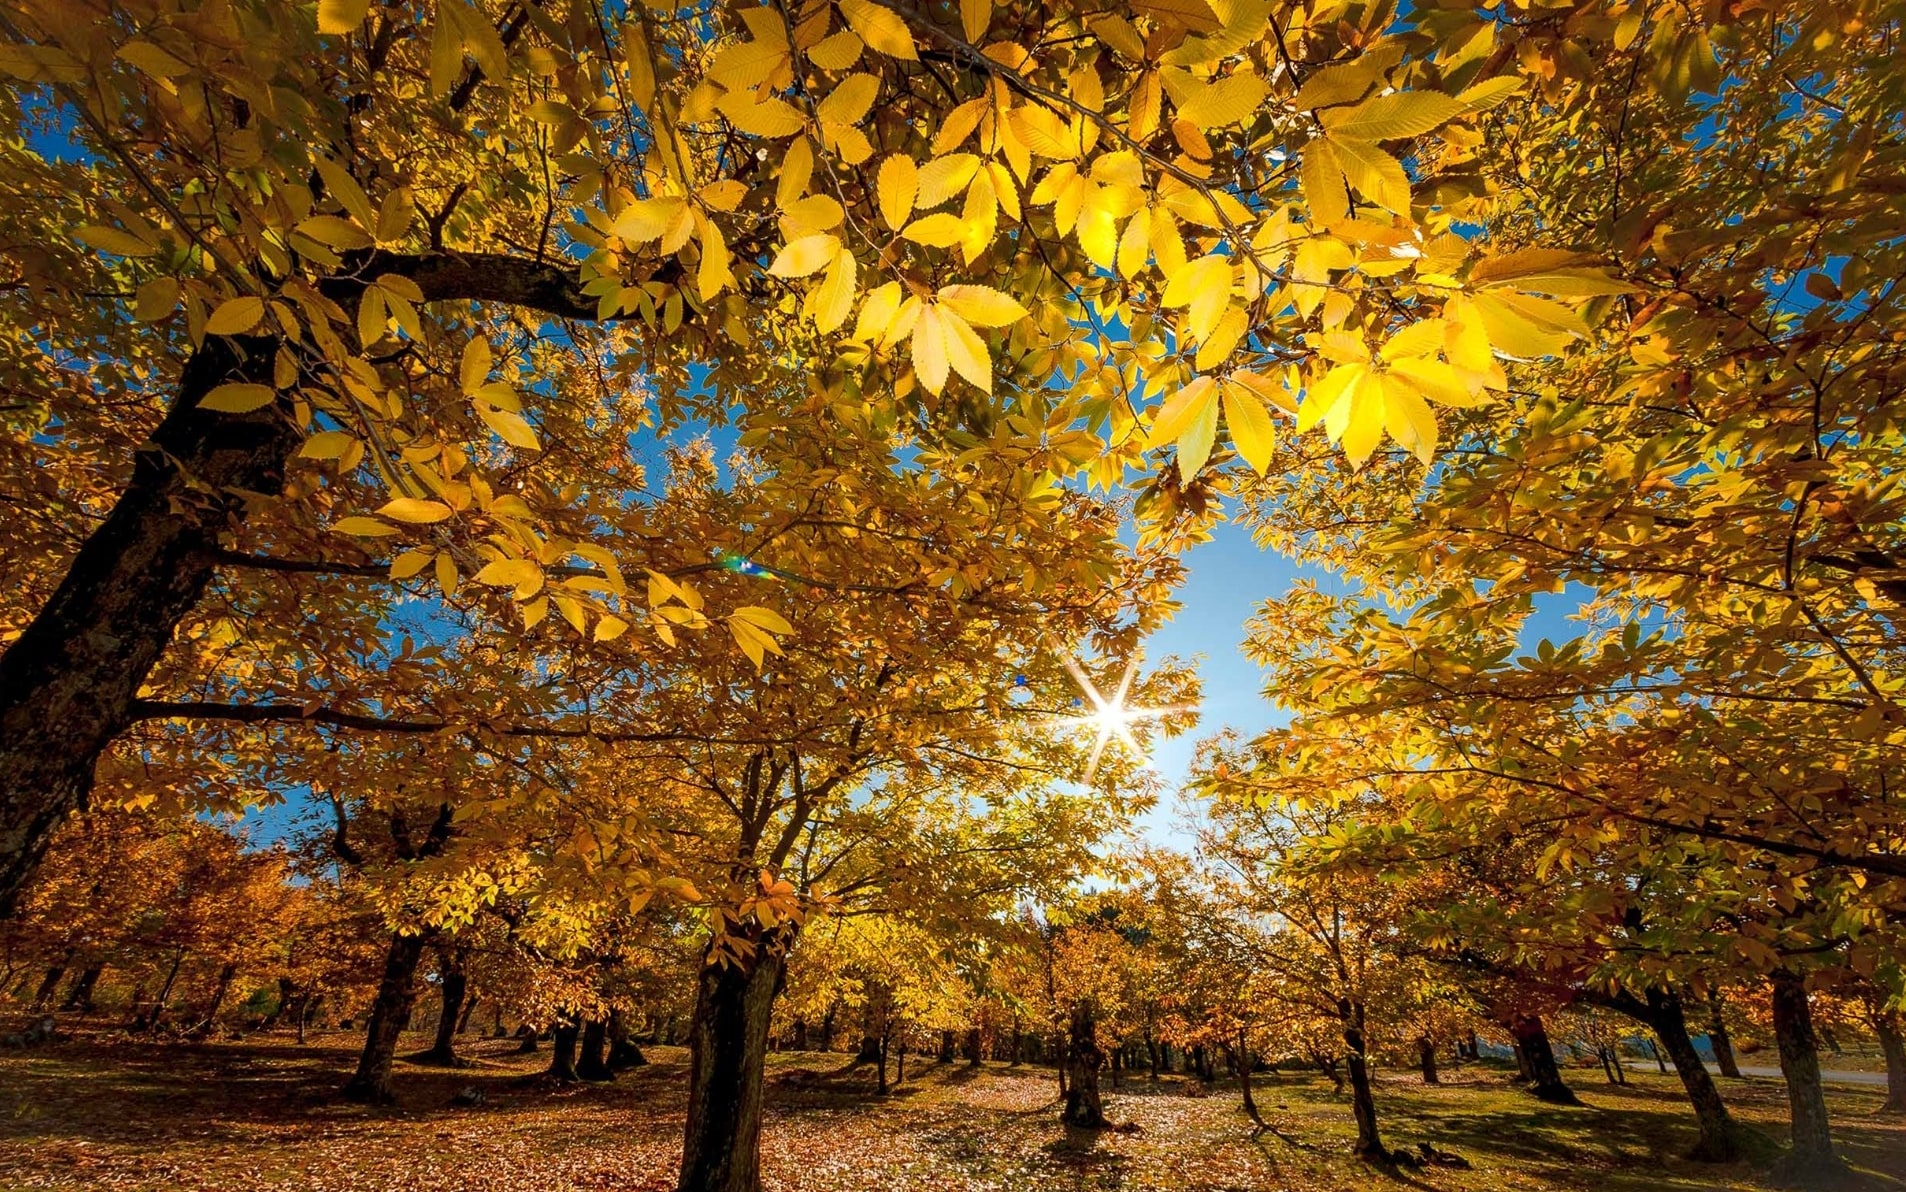 On September 22, goodbye summer: it is the day of the autumn equinox